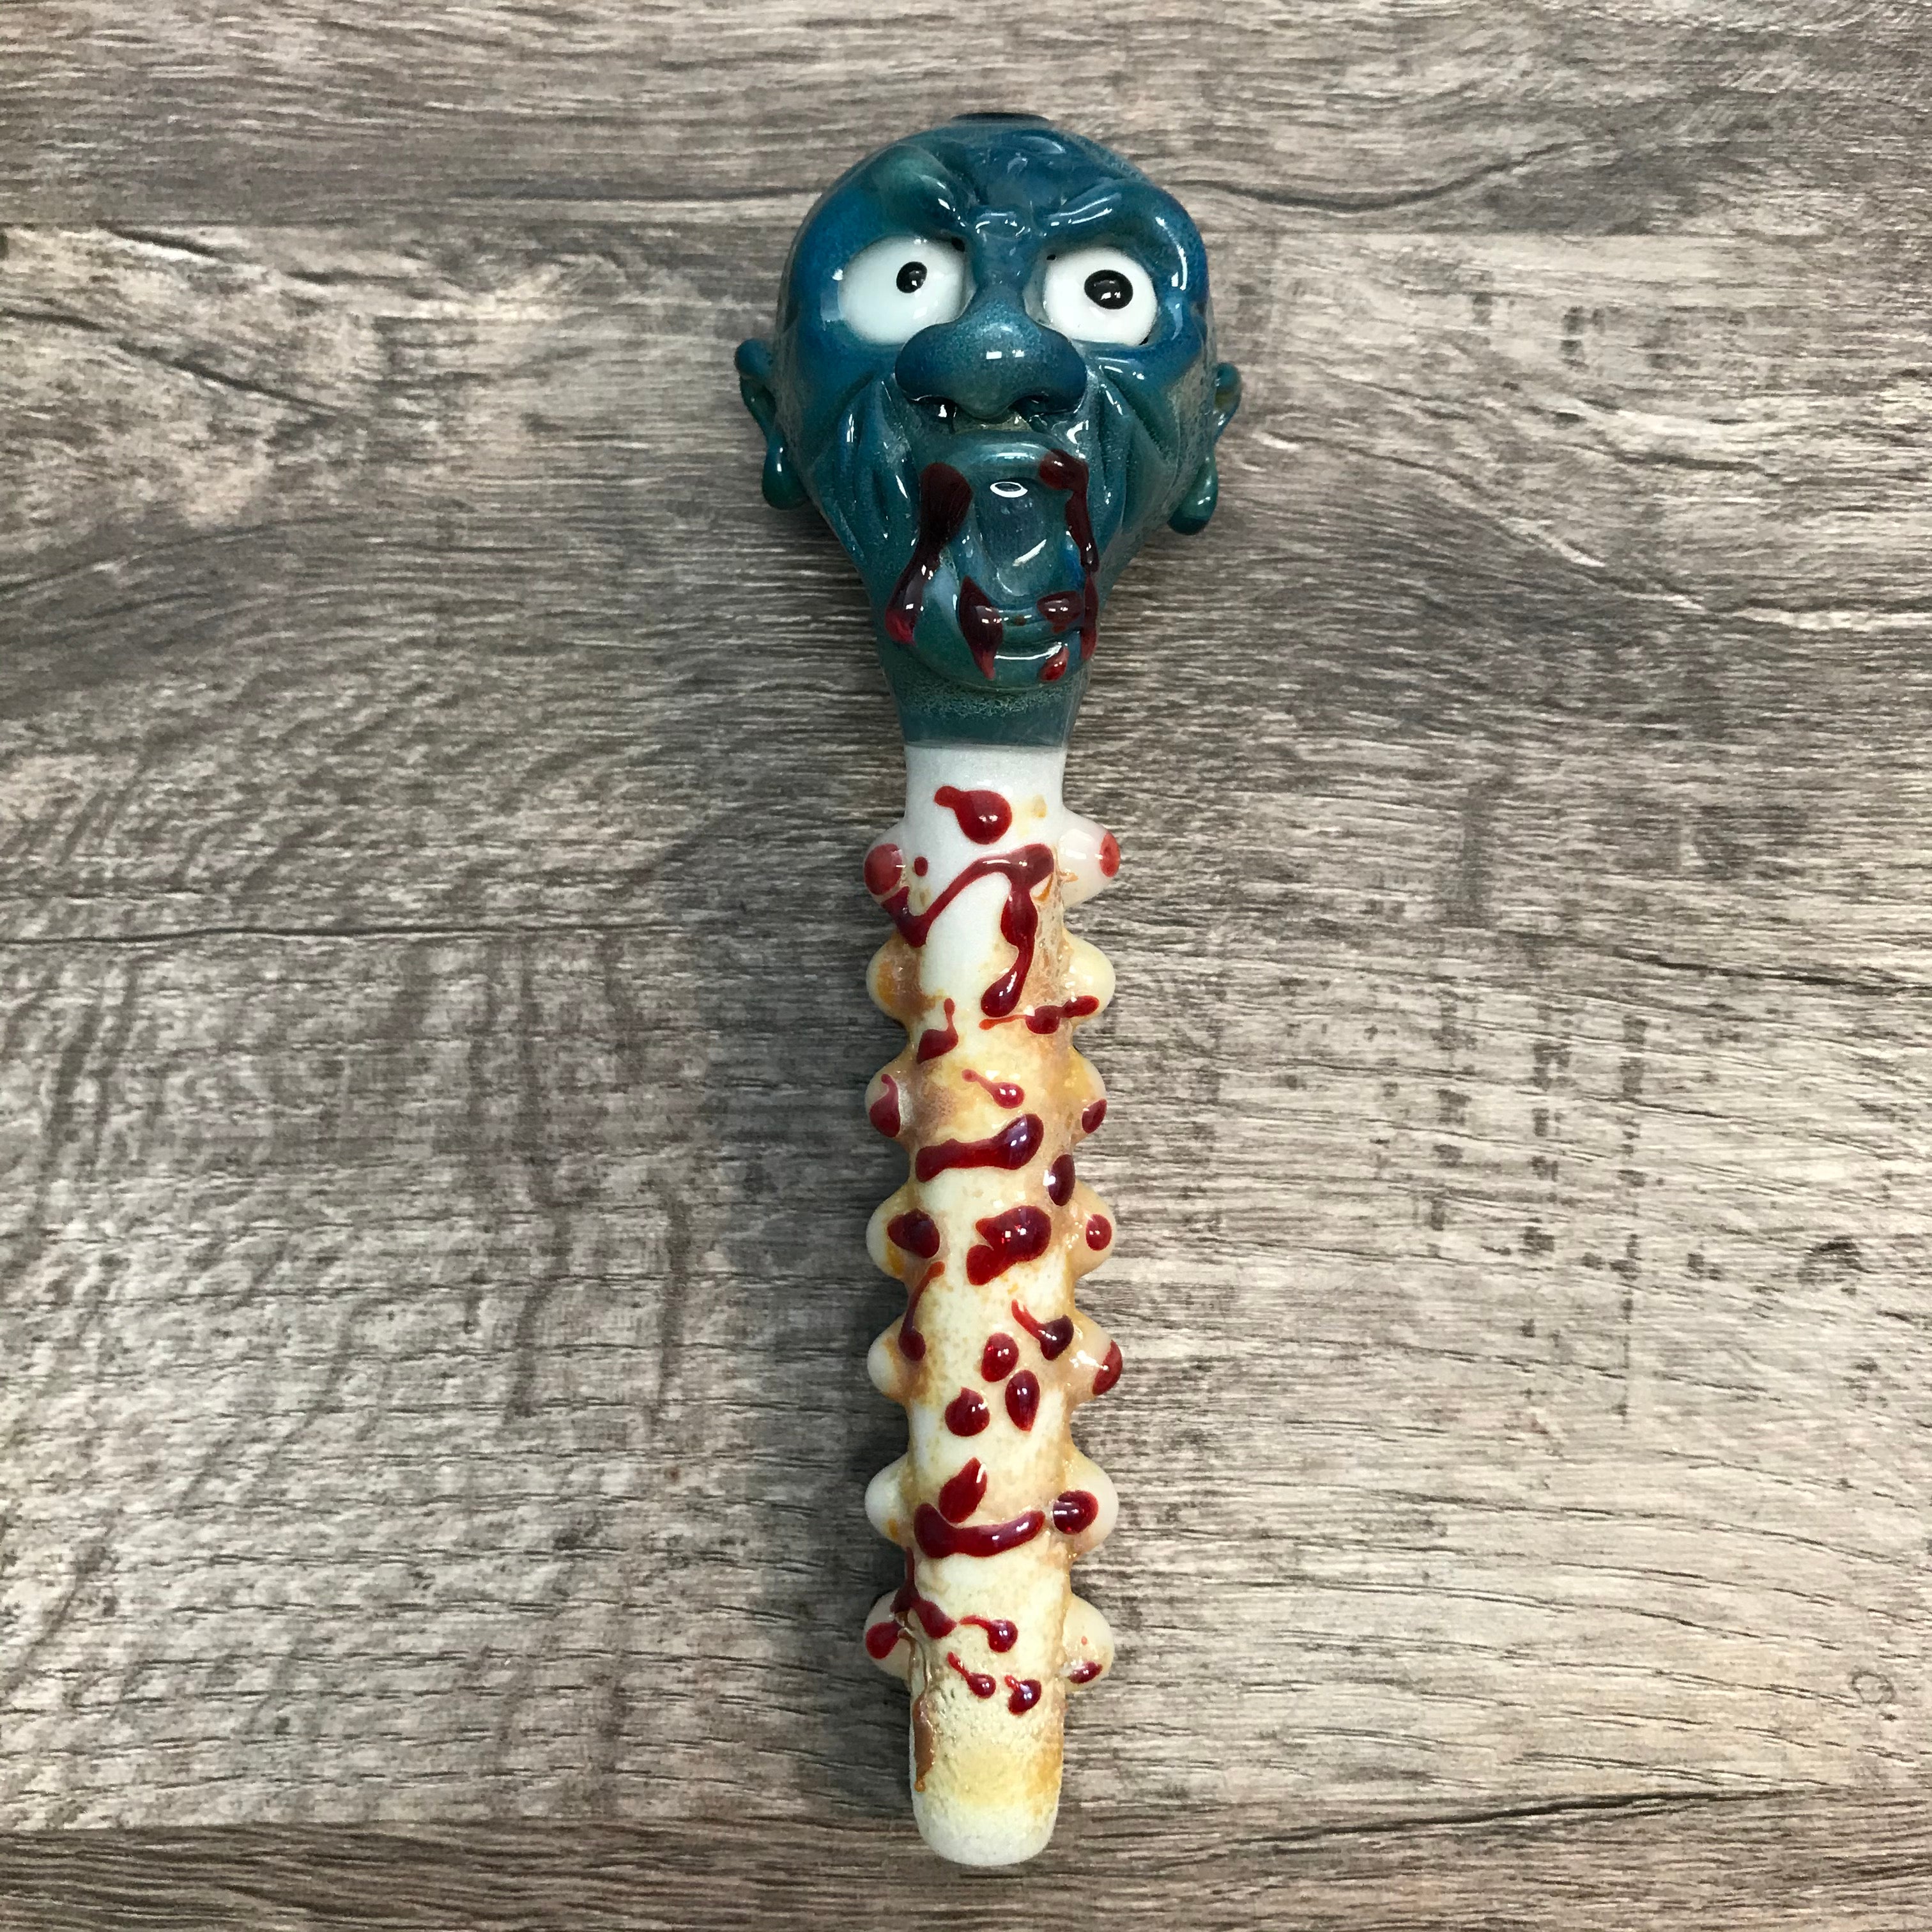 Rated R Zombie Spinal Column Spoon